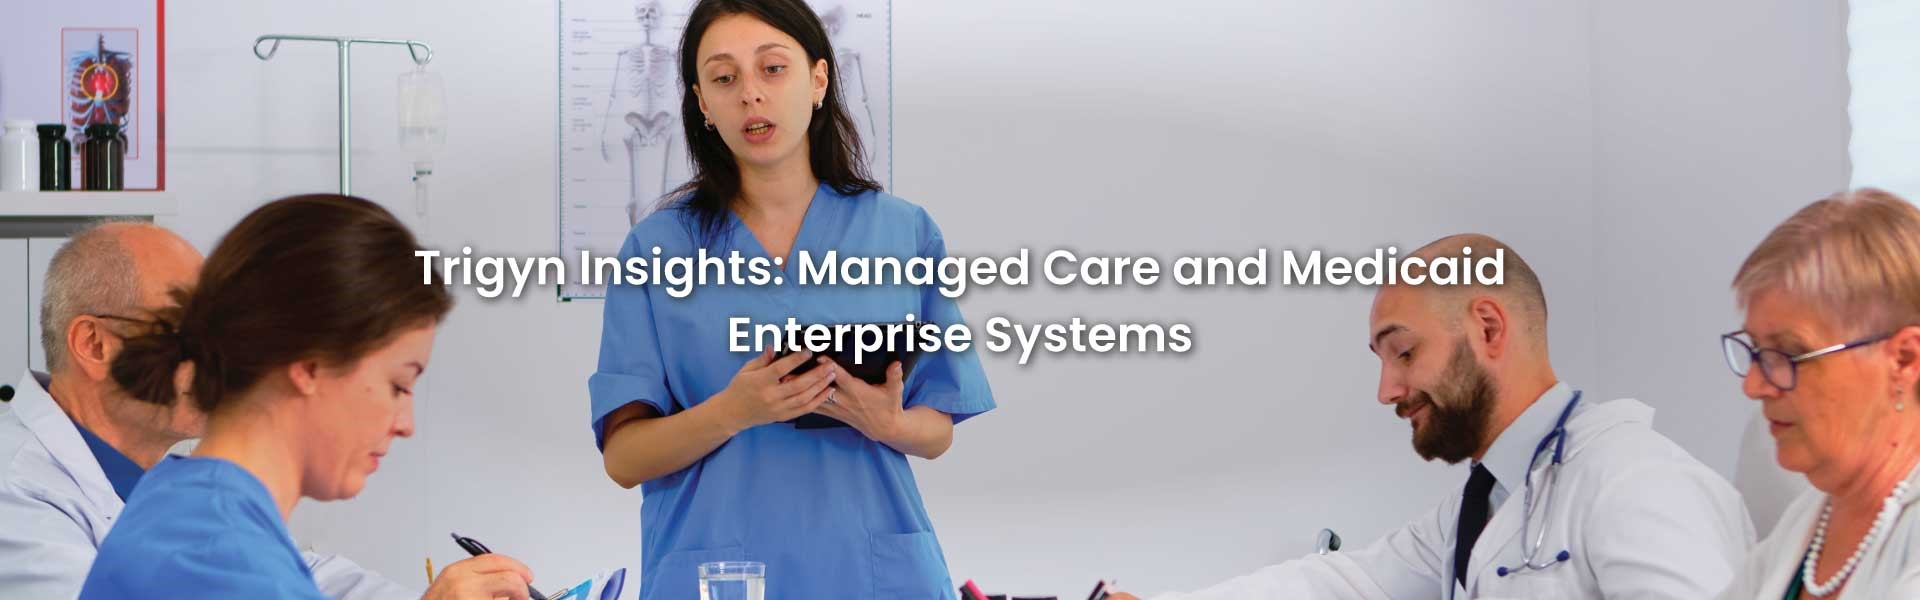 Medicaid Enterprise Systems and Managed Care